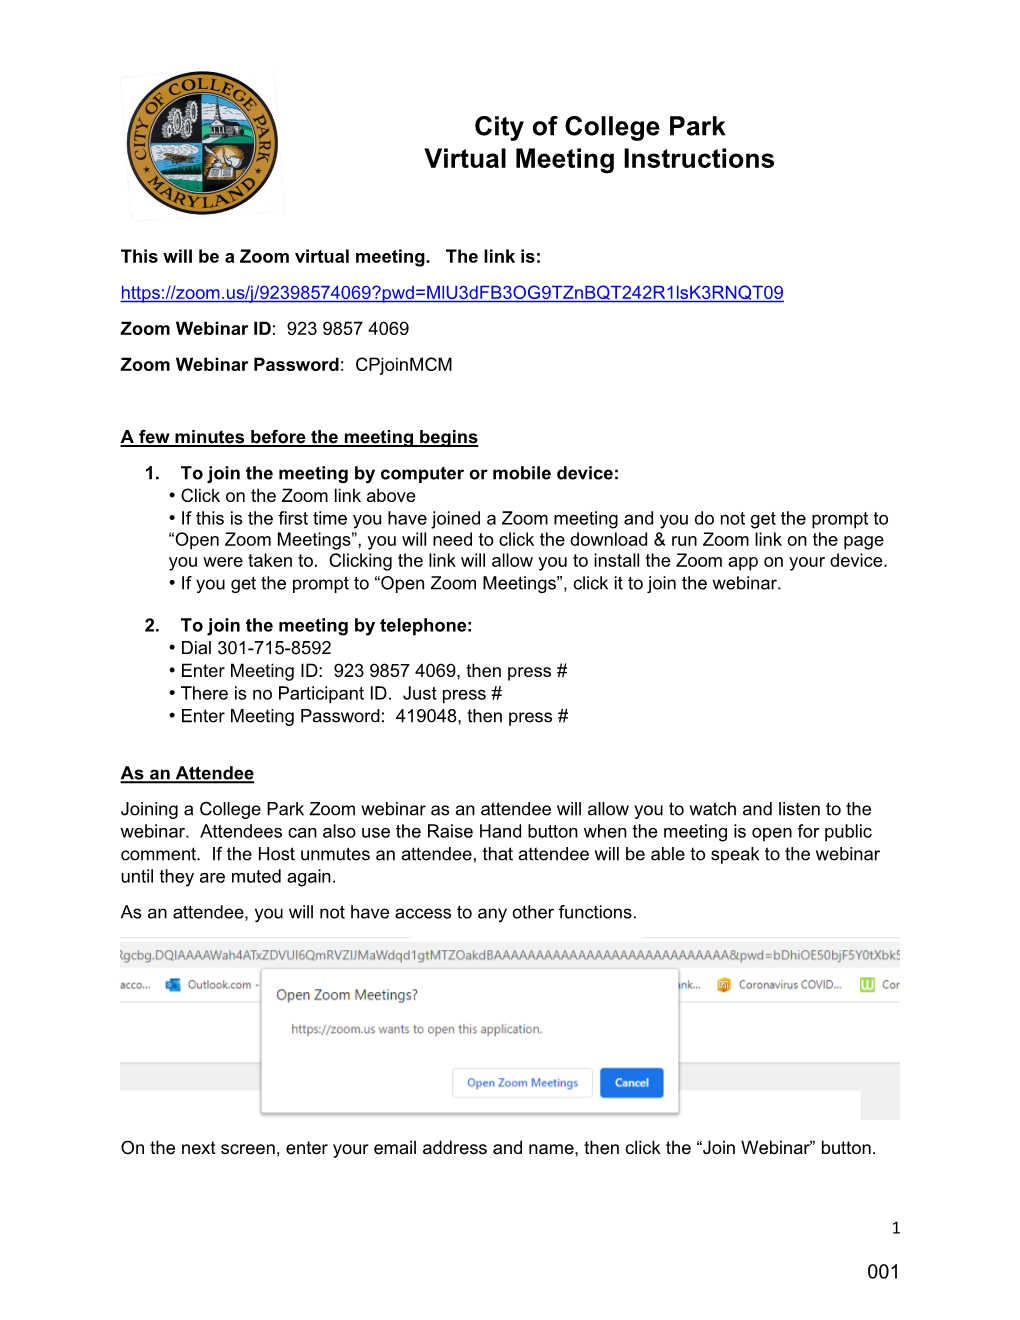 City of College Park Virtual Meeting Instructions